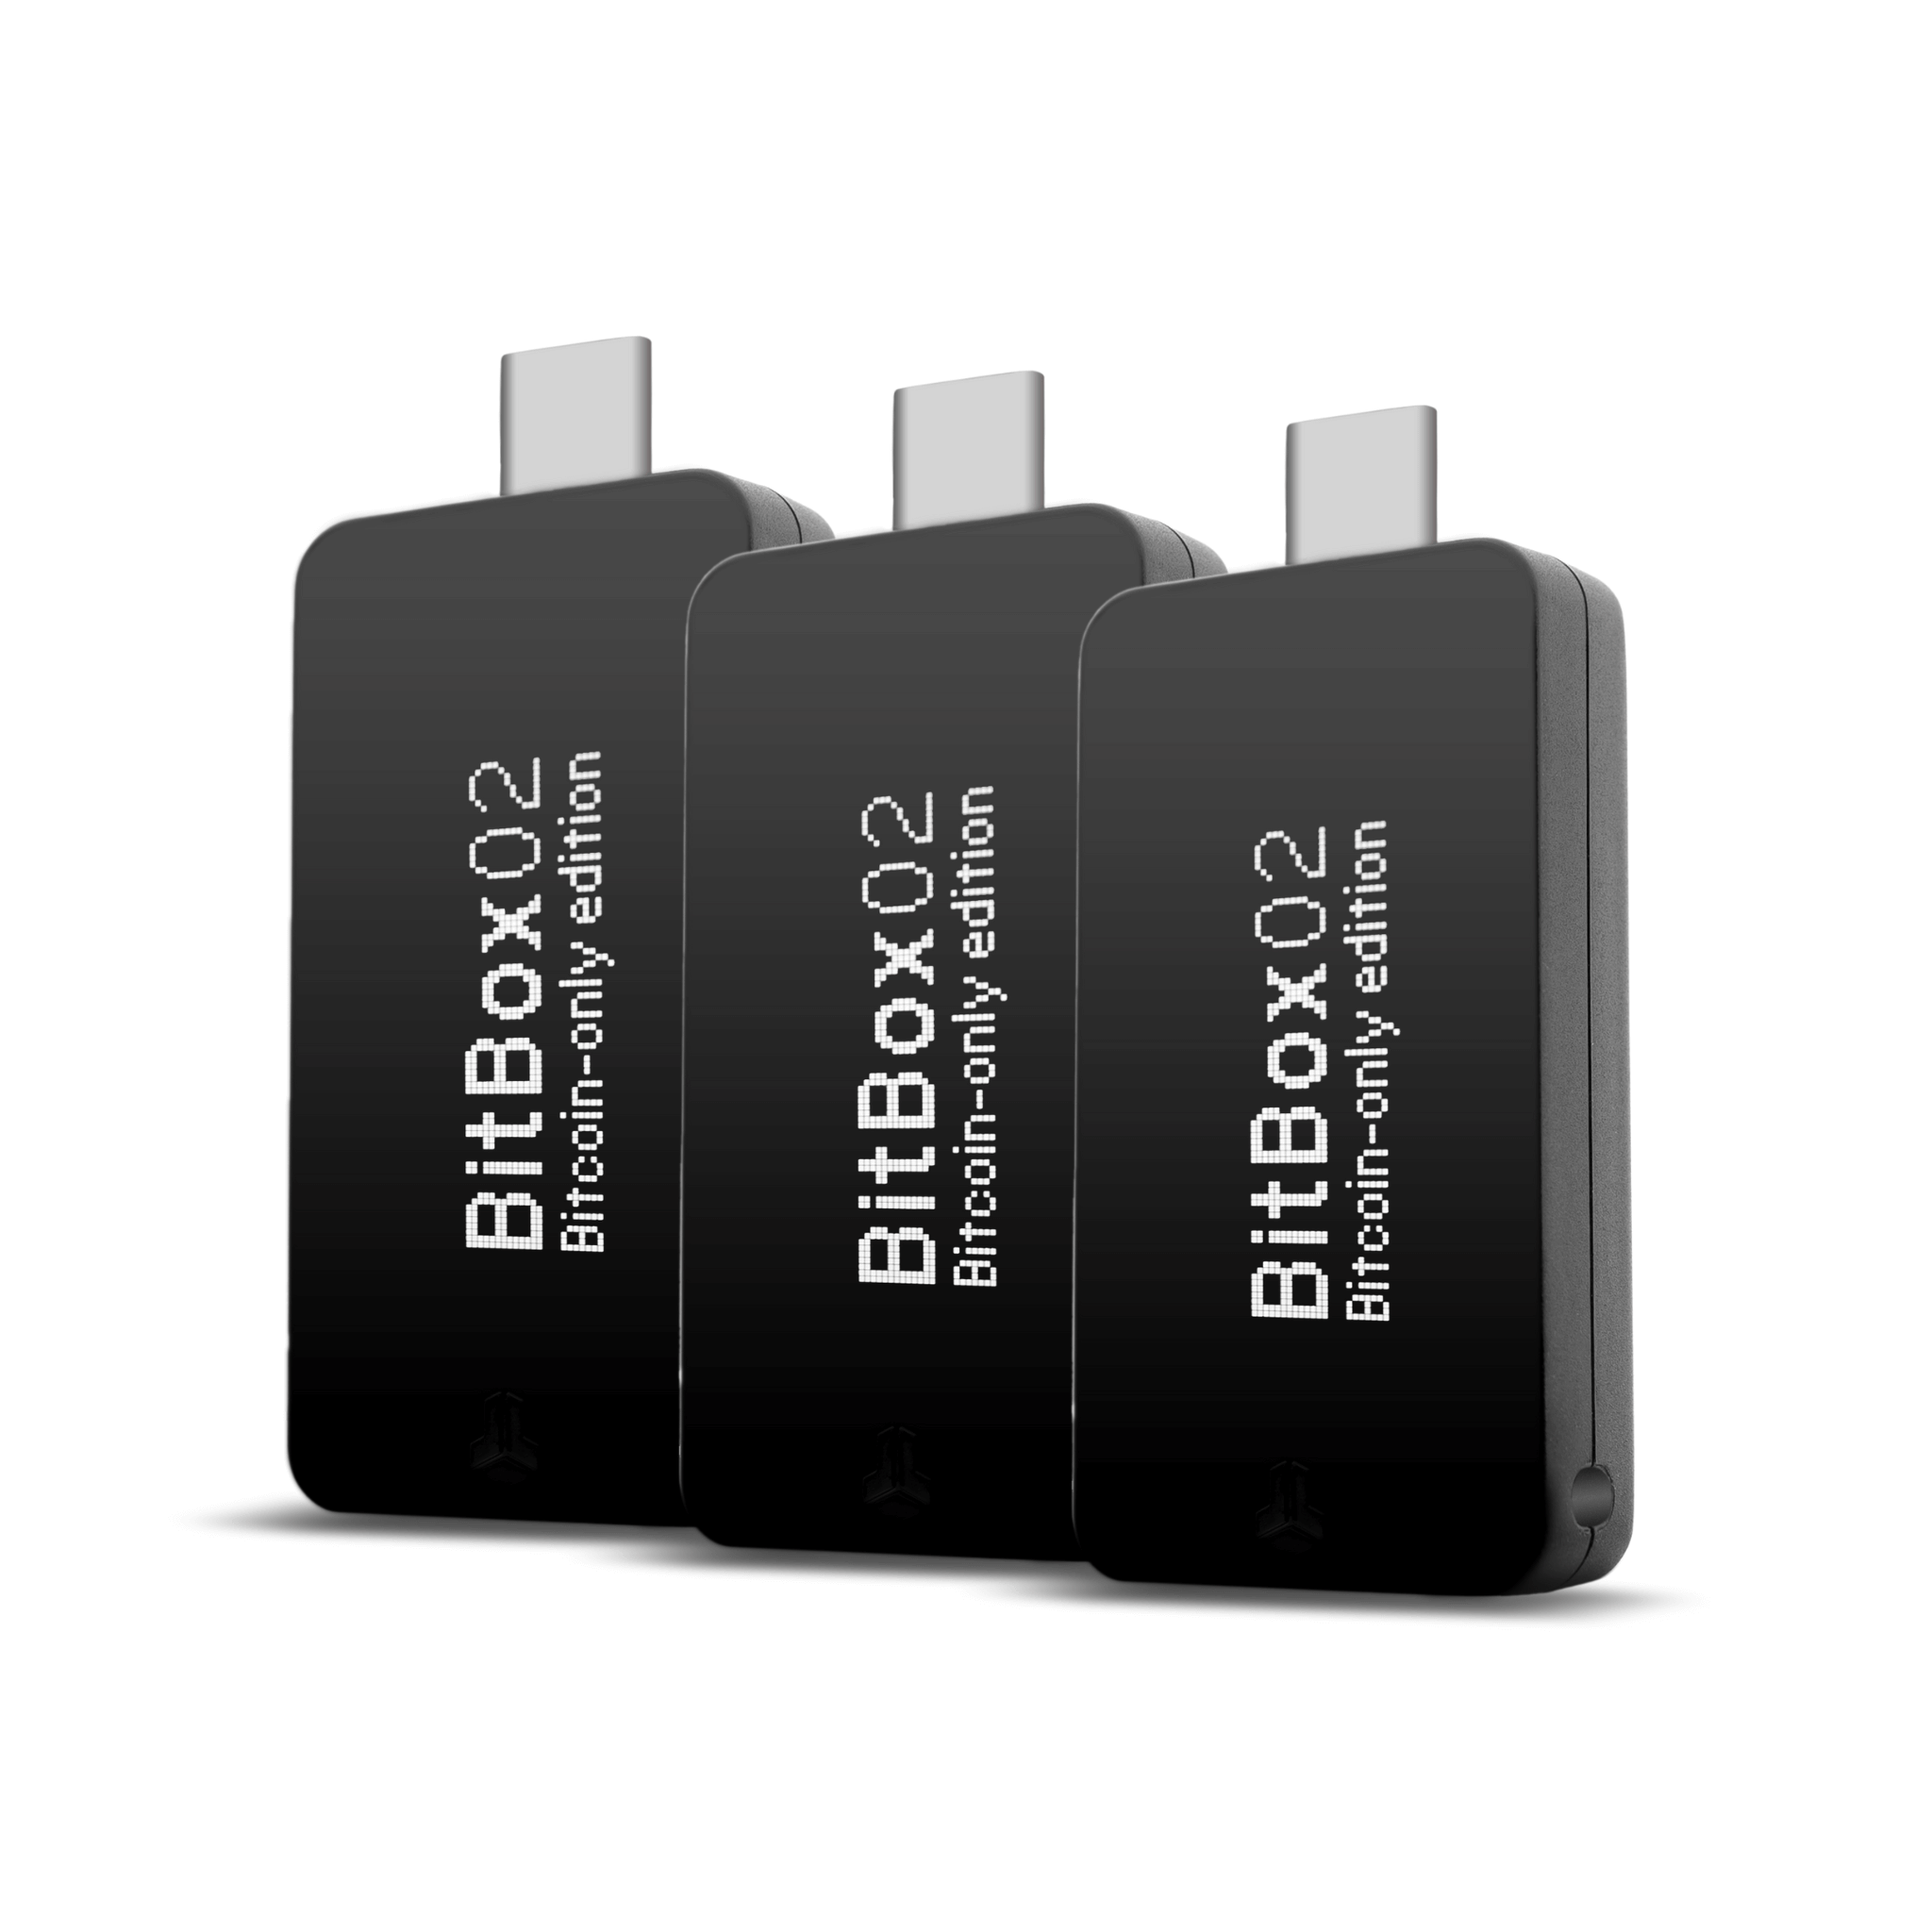 BitBox02 Bitcoin-Only Edition Pack of 3 Cryptocurrency Hardware Wallets